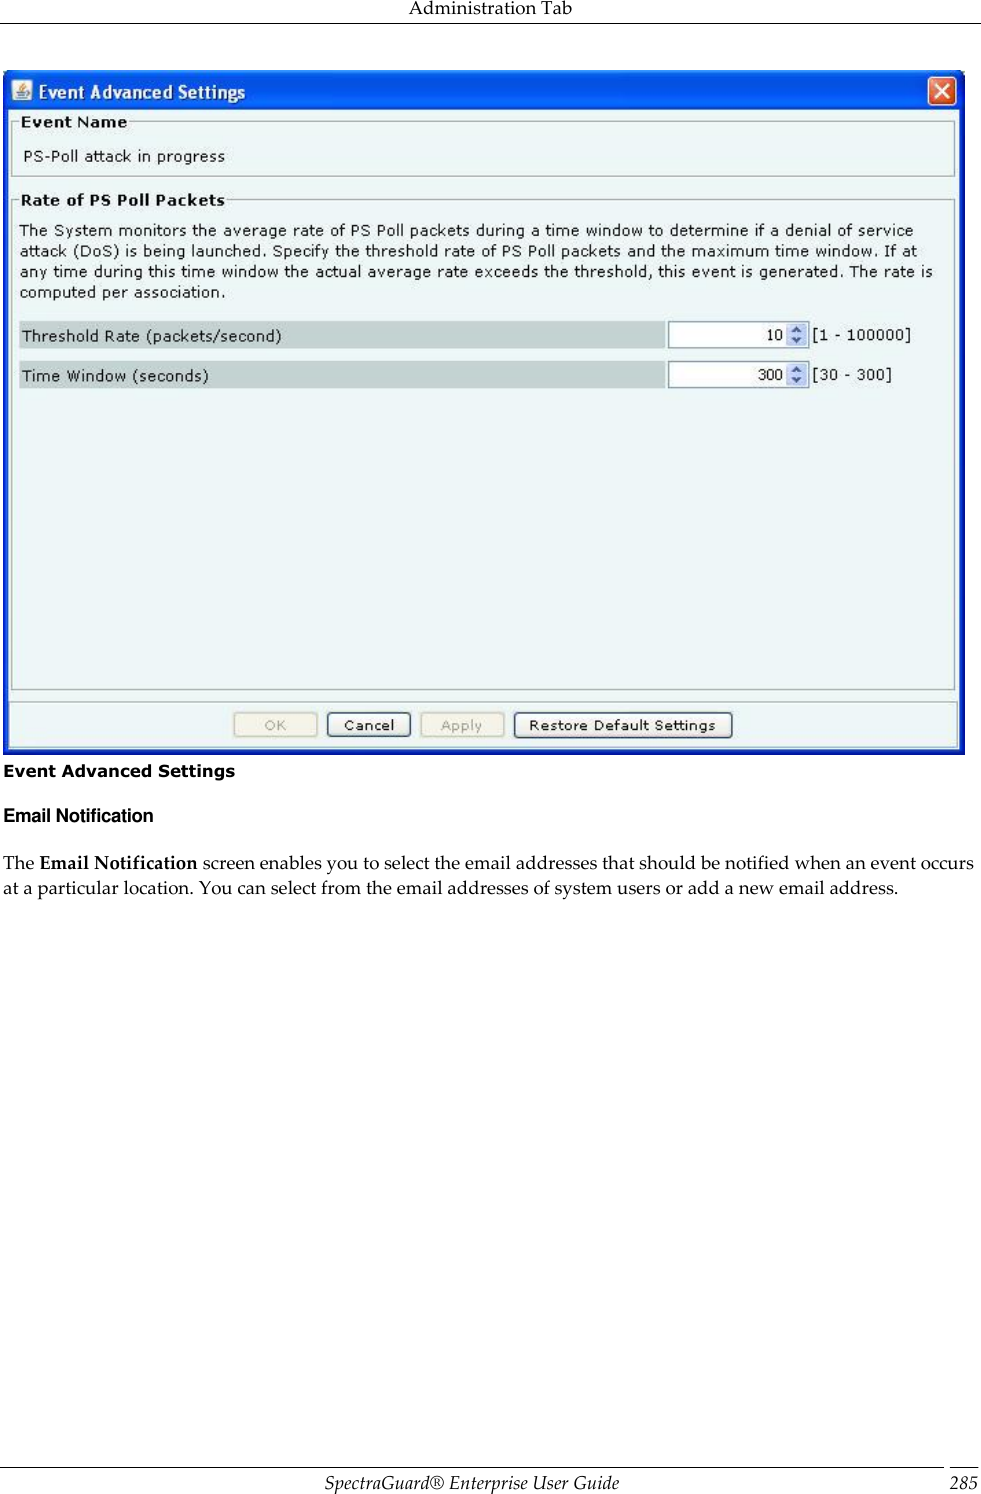 Administration Tab SpectraGuard®  Enterprise User Guide 285  Event Advanced Settings Email Notification The Email Notification screen enables you to select the email addresses that should be notified when an event occurs at a particular location. You can select from the email addresses of system users or add a new email address. 